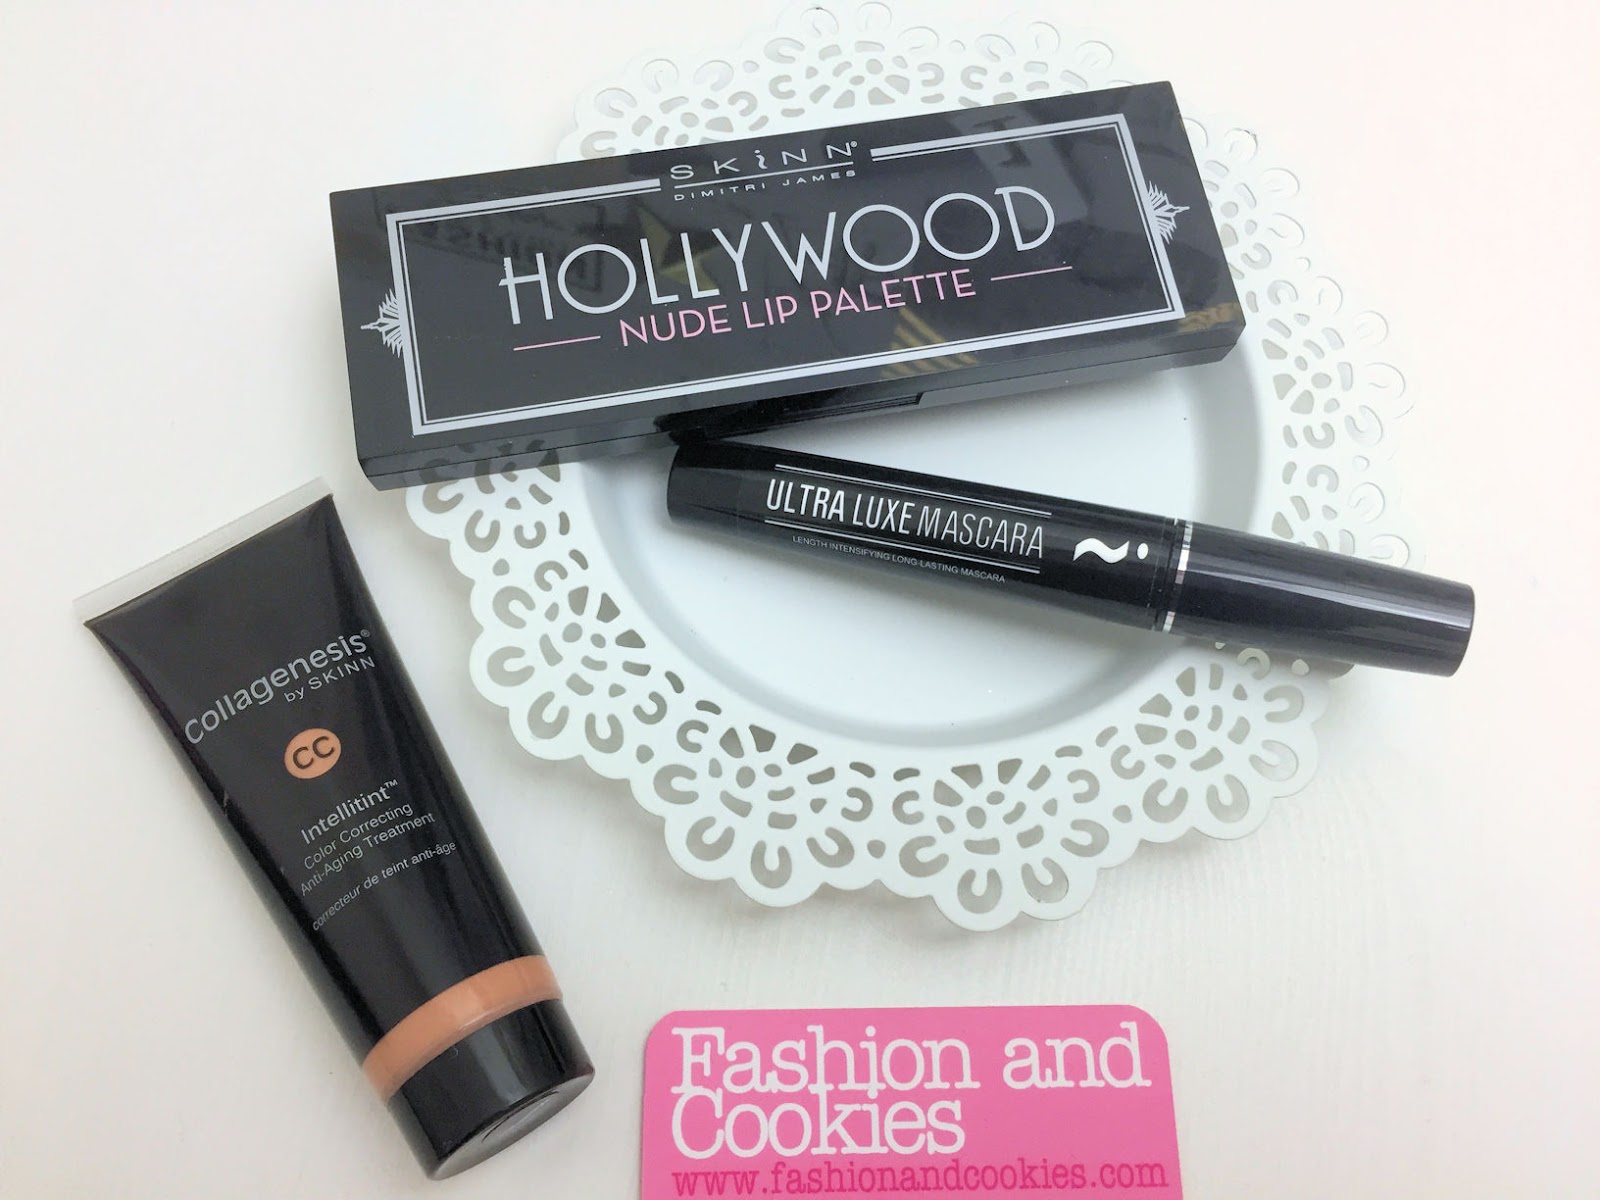 SKINN Cosmetics makeup on HSE24 on Fashion and Cookies beauty blog, beauty blogger